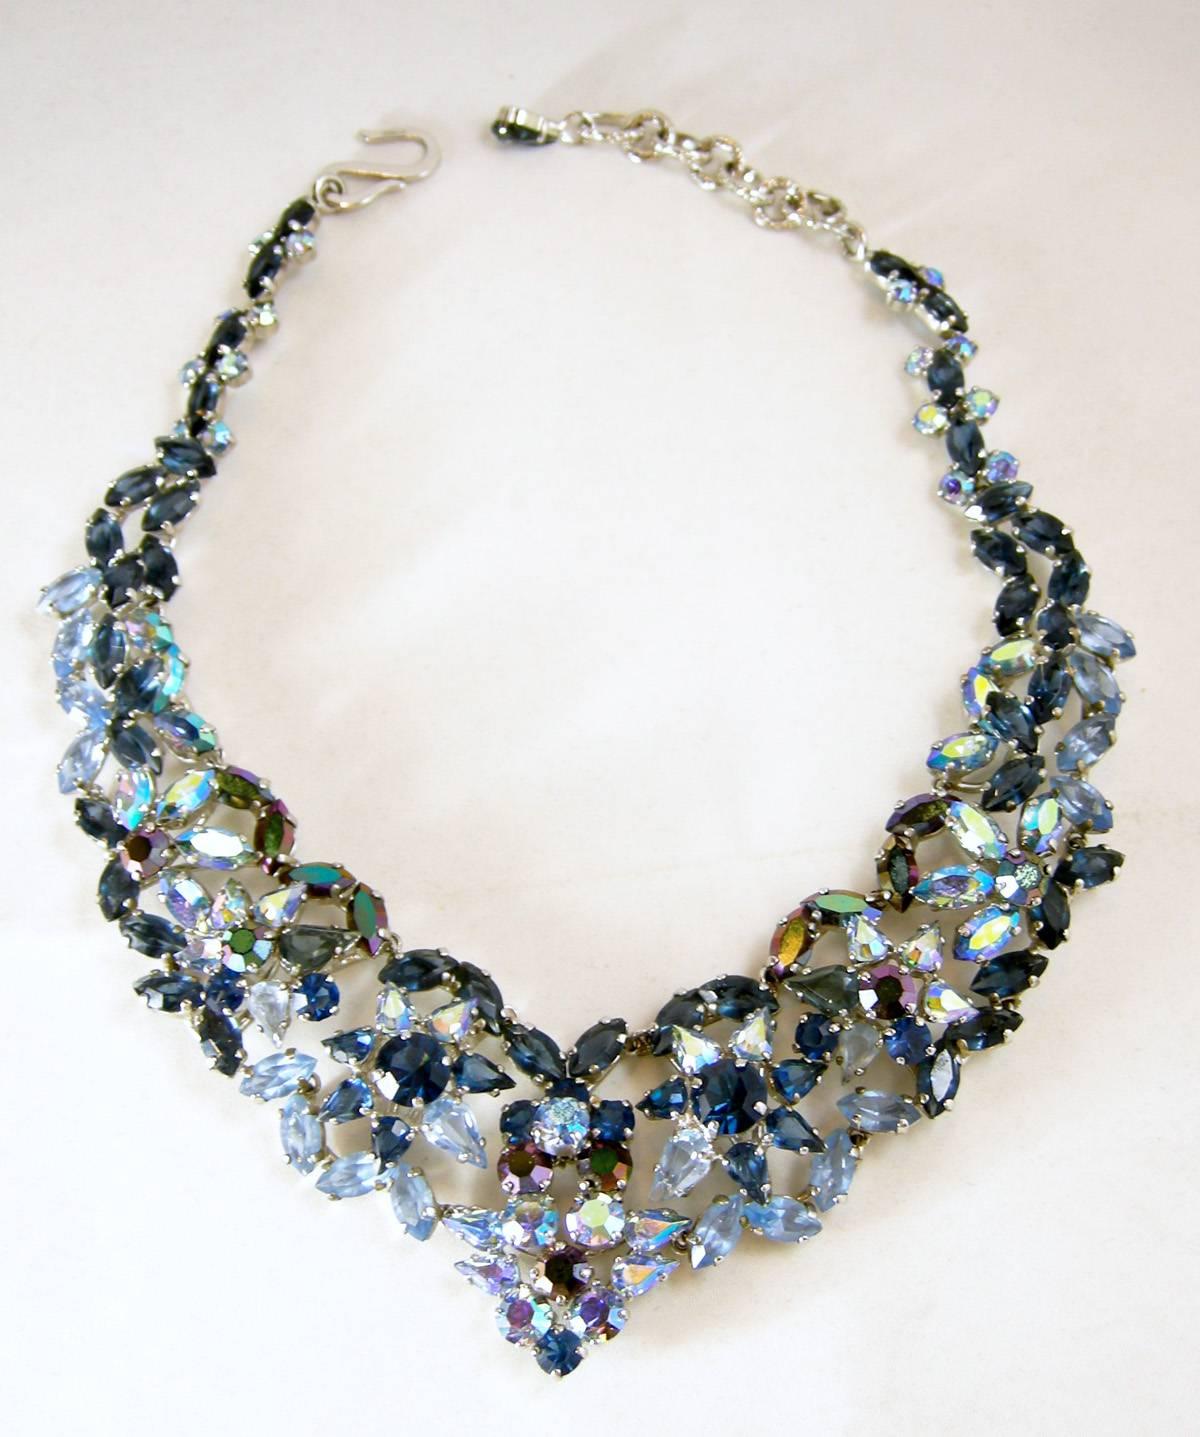 This is a gorgeous Christian Dior 1960s necklace created with a 3-dimensional design with light and dark blue crystals in-between two rows of marquis shaped crystals.  The center has a flower design of dark blue crystal with a light blue center